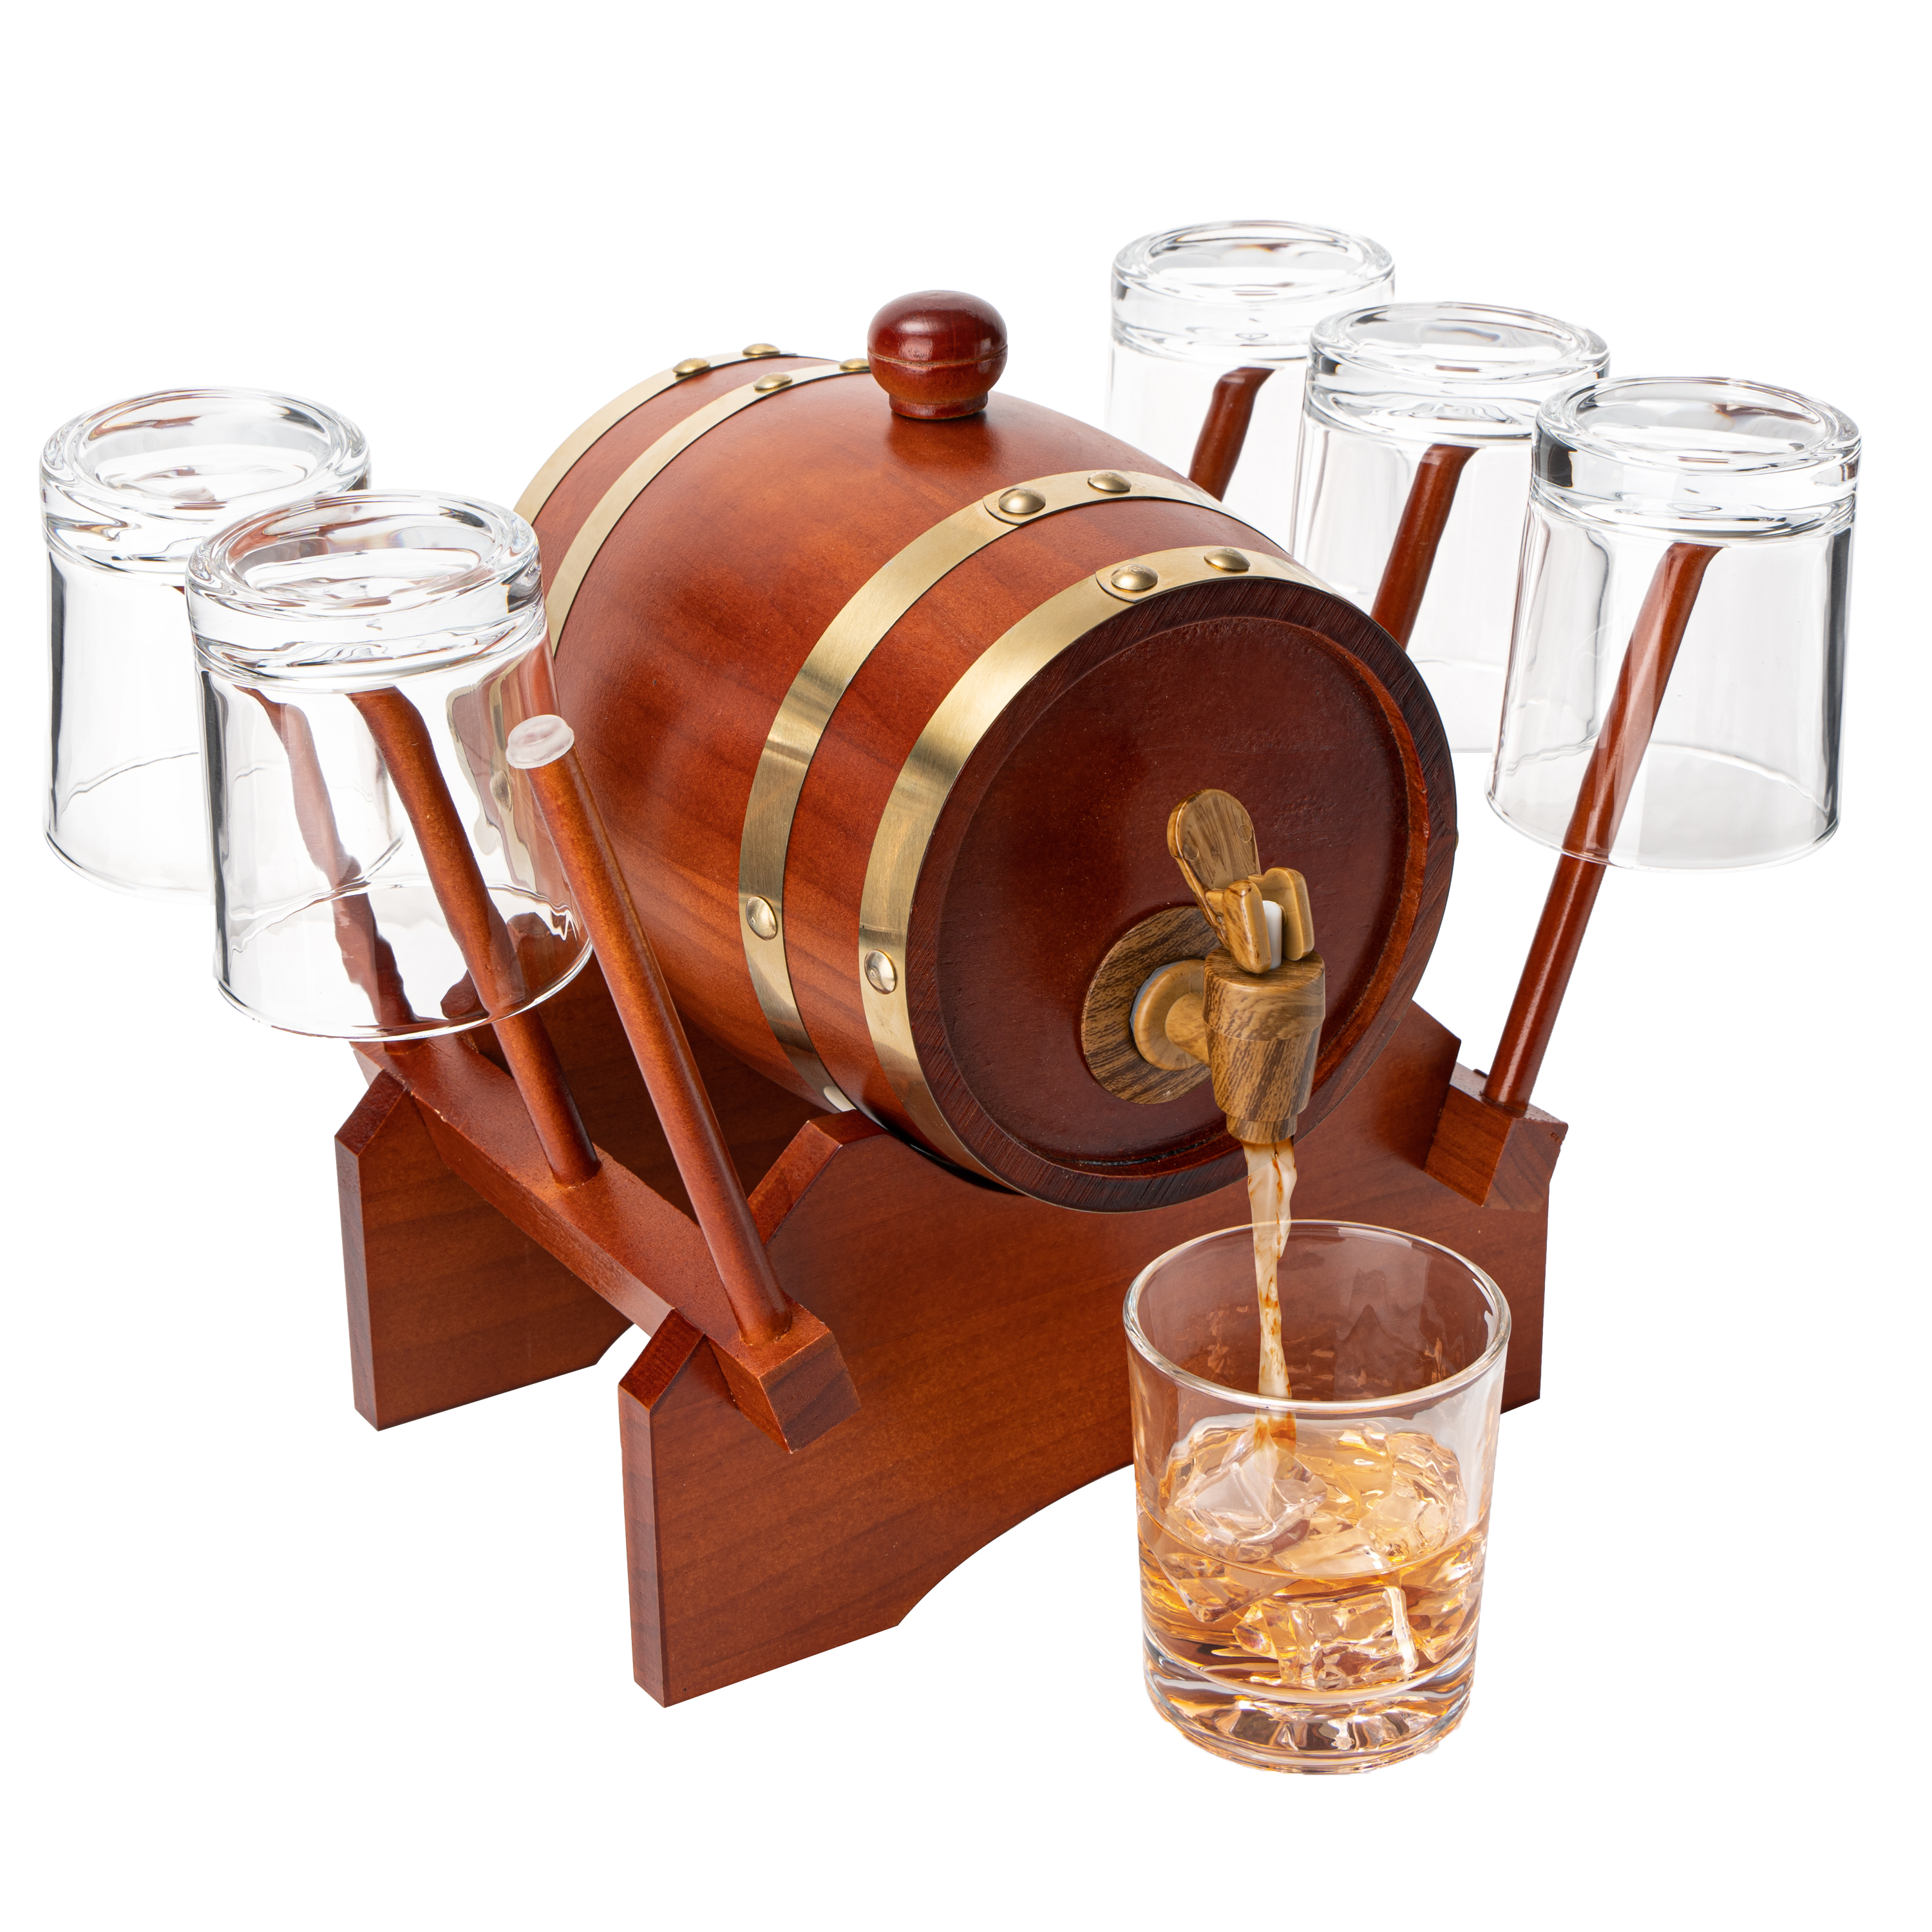 Barrel Decanter with 6 Whiskey Glasses by The Wine Savant - 1000 mL Mahogany Wood Old Fashioned Classic Whiskey Decanter Set, Gifts for Him, Father's Day, Gift Ideas-0